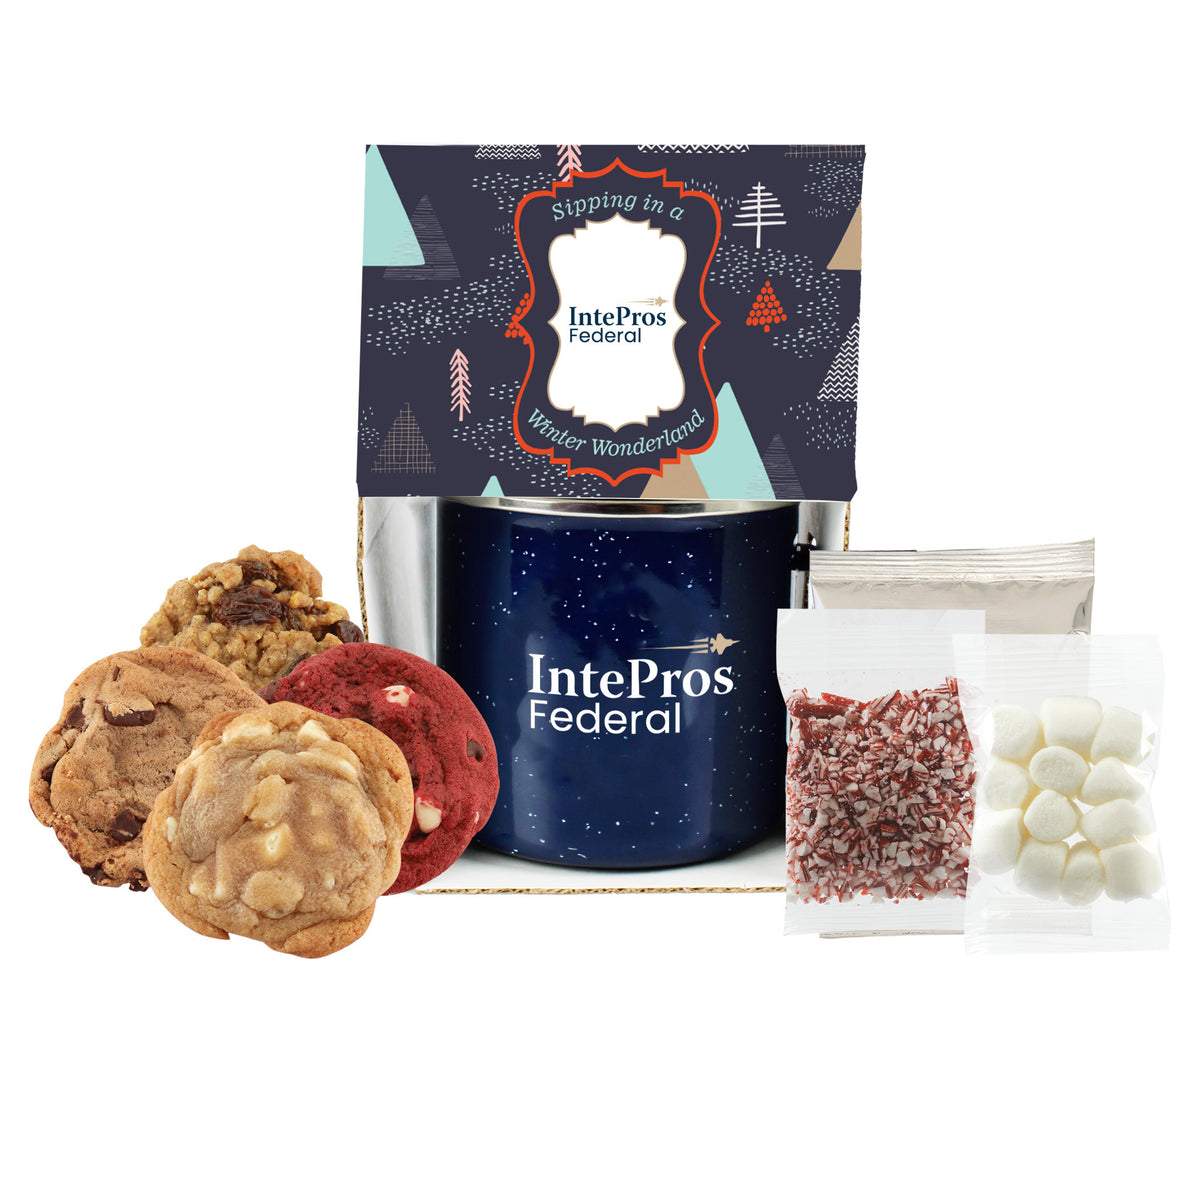 Speckled Camping Mug - 16 oz., Gourmet Cookies (4), Hot Chocolate Holiday Set